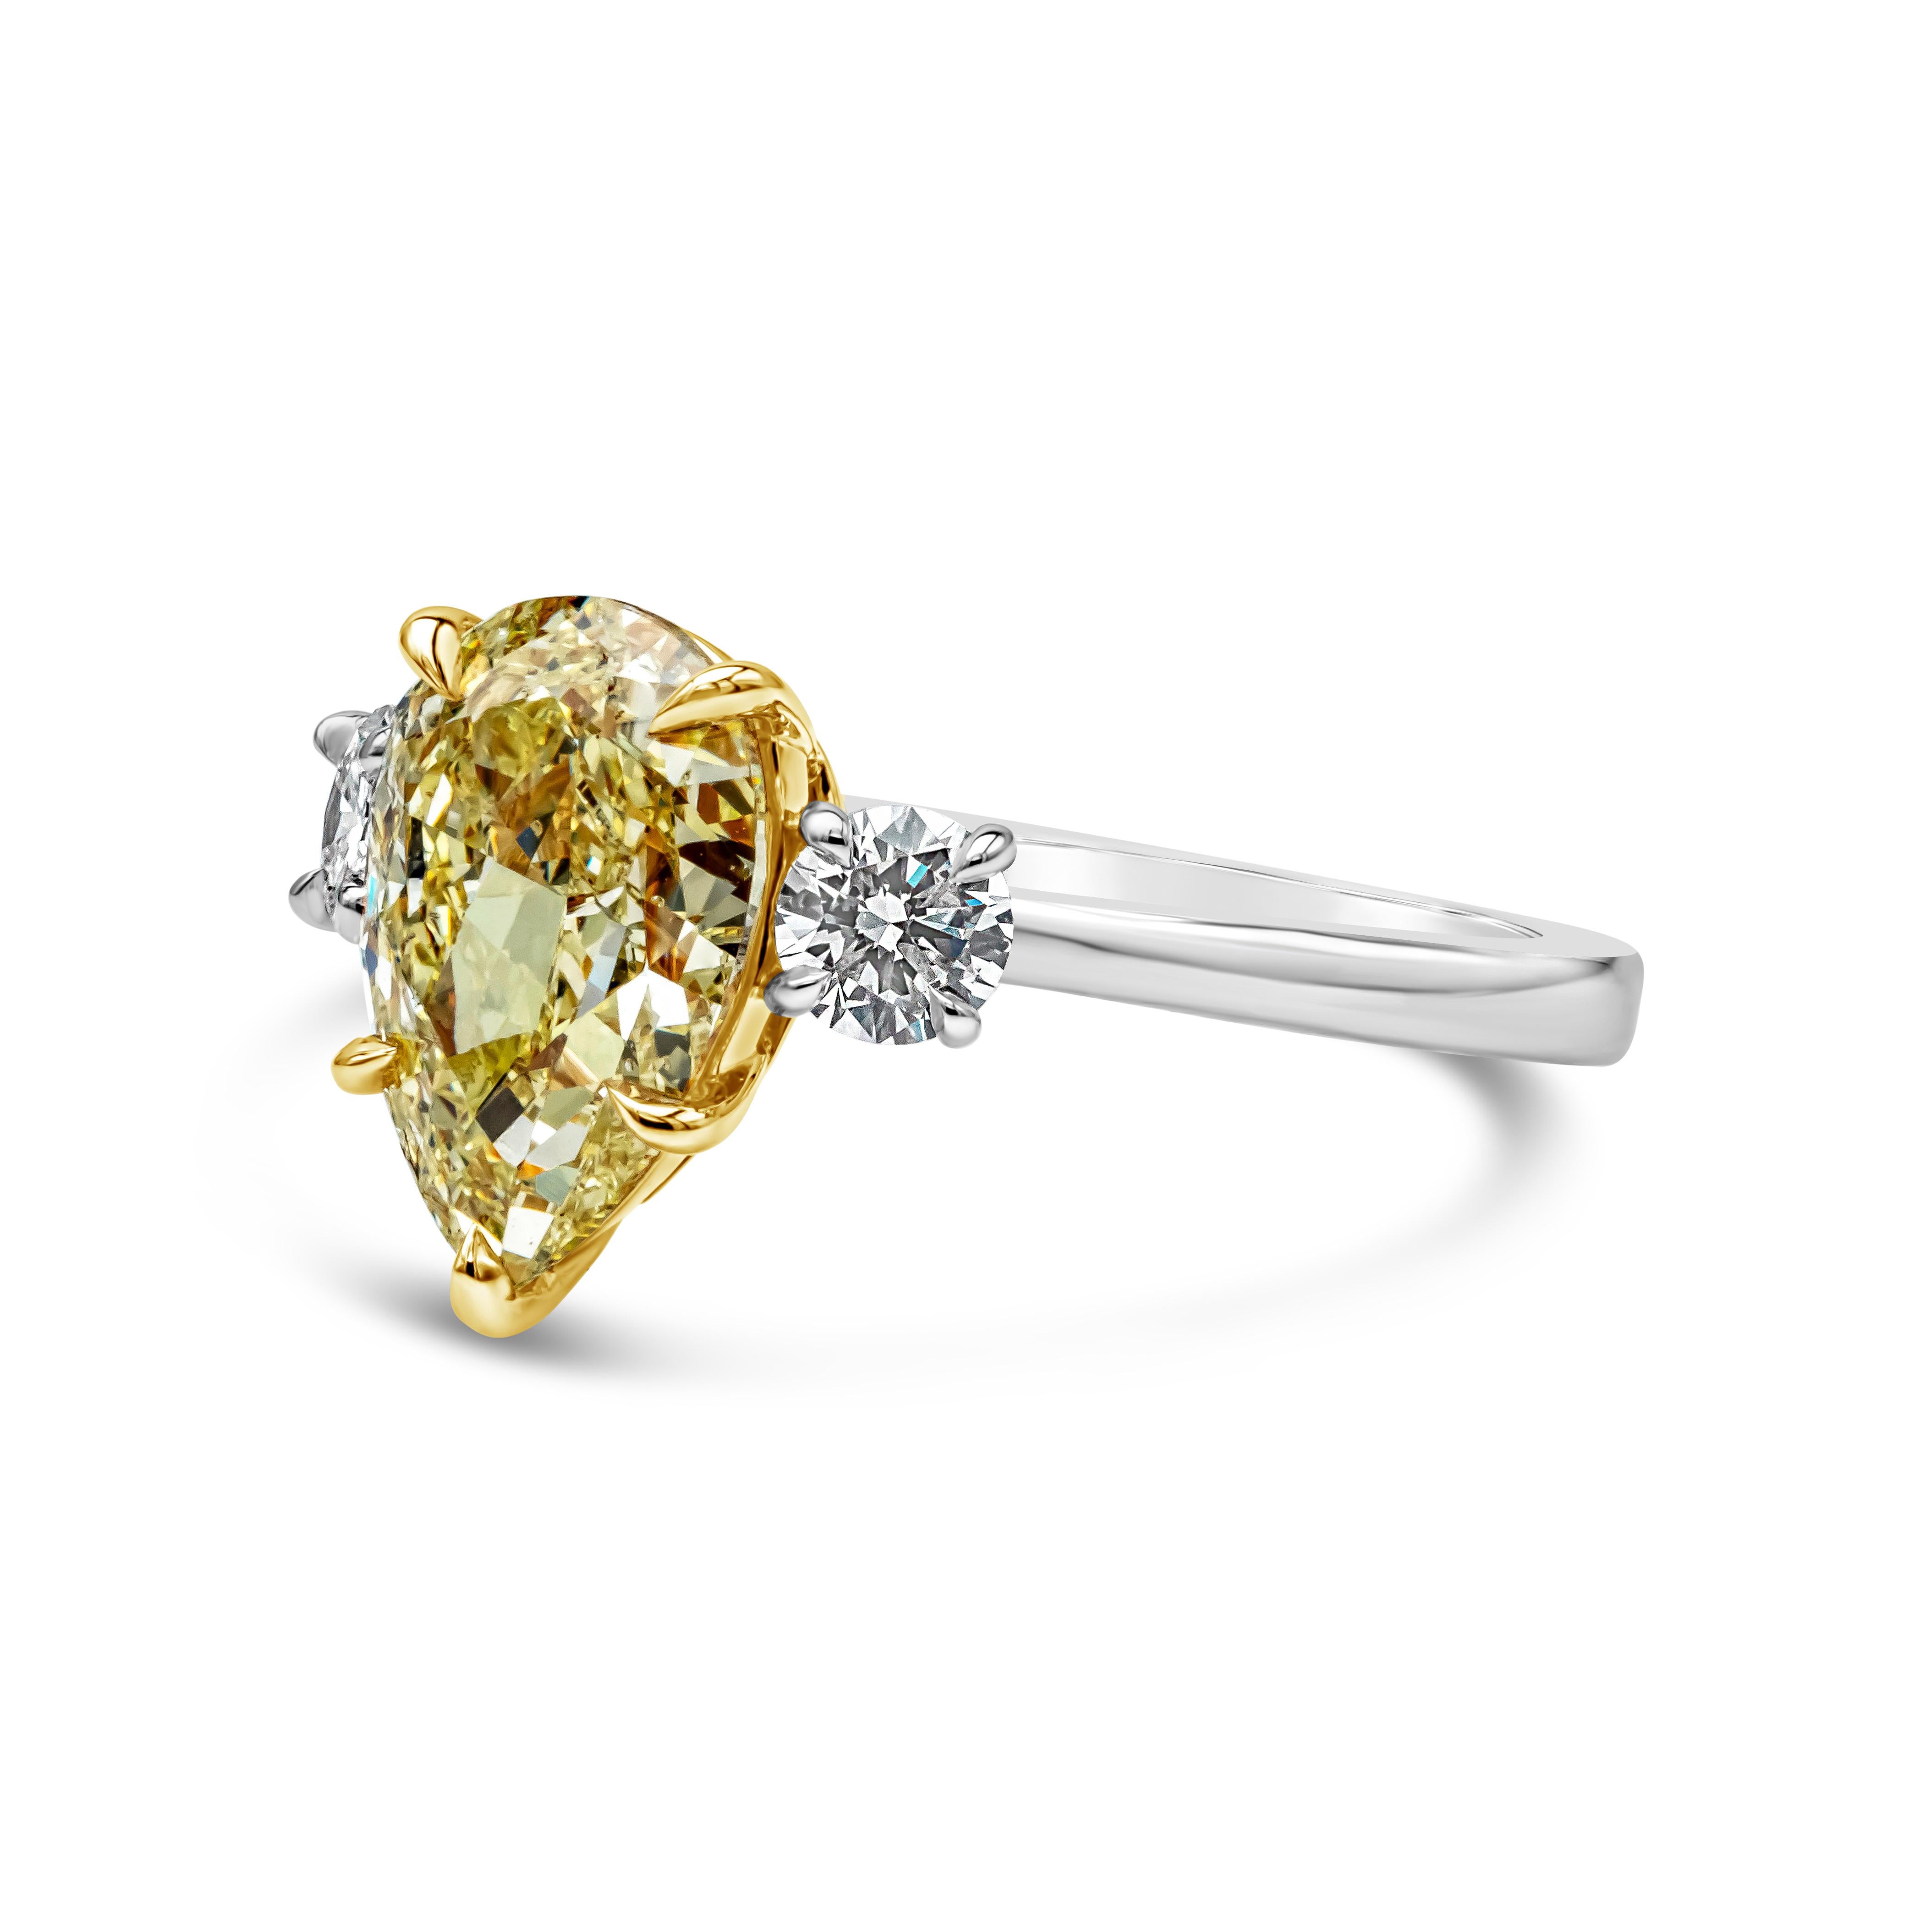 This beautiful three stone engagement ring style showcasing a GIA Certified pear shape fancy yellow diamond, SI2 in Clarity, set in a five prong basket setting. Flanked by brilliant round diamonds on each side weighing 0.38 carats total, F Color and